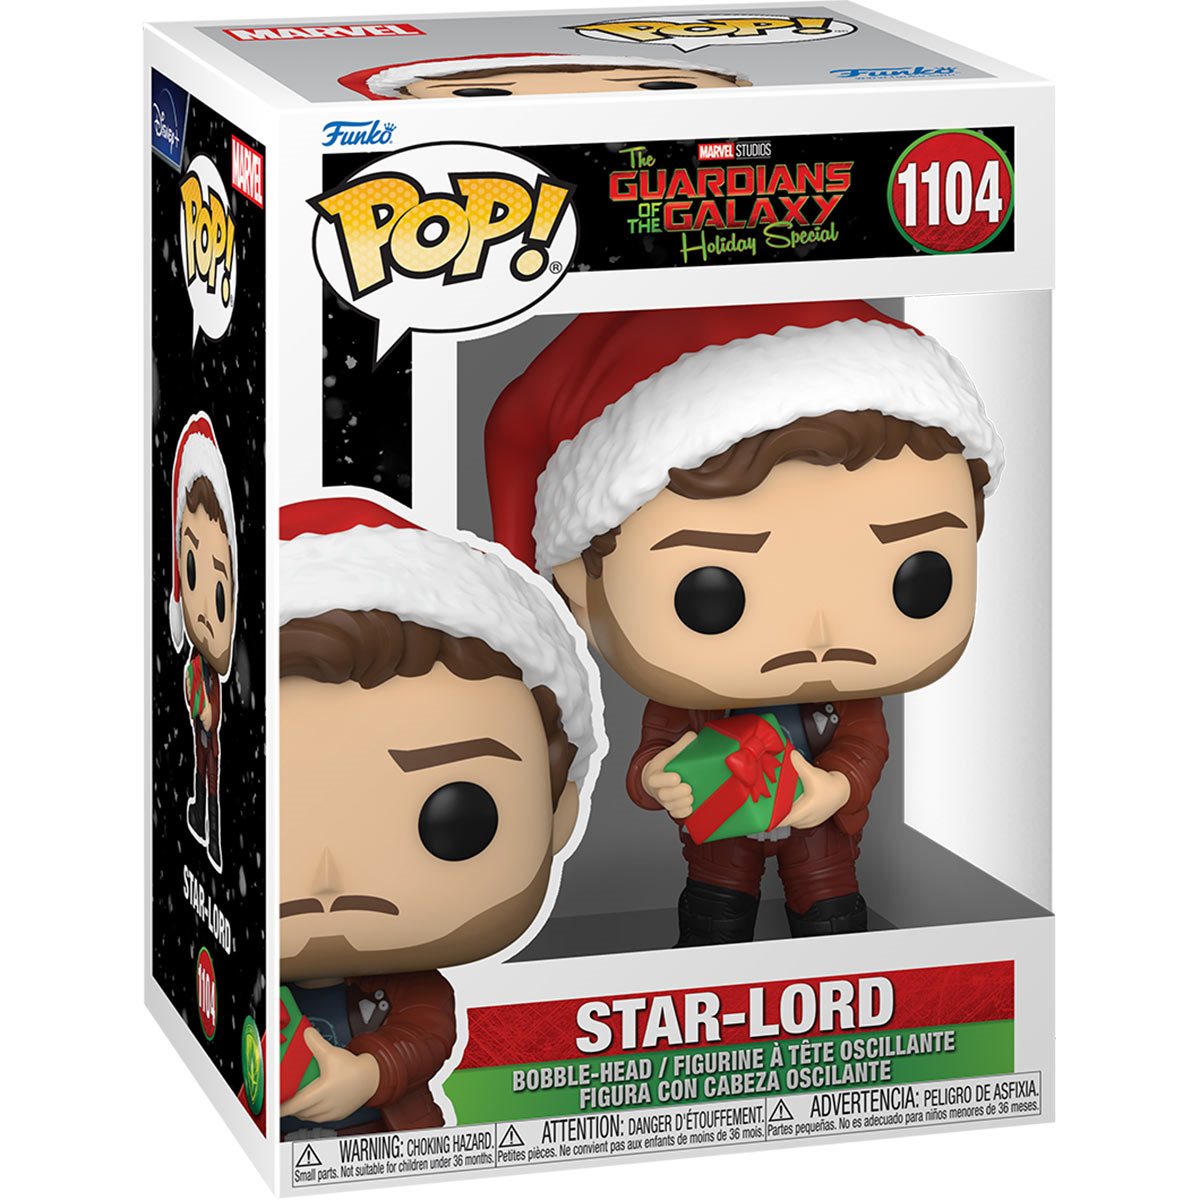 Star-Lord The Guardians of the Galaxy Holiday Special Pop! Vinyl Figure